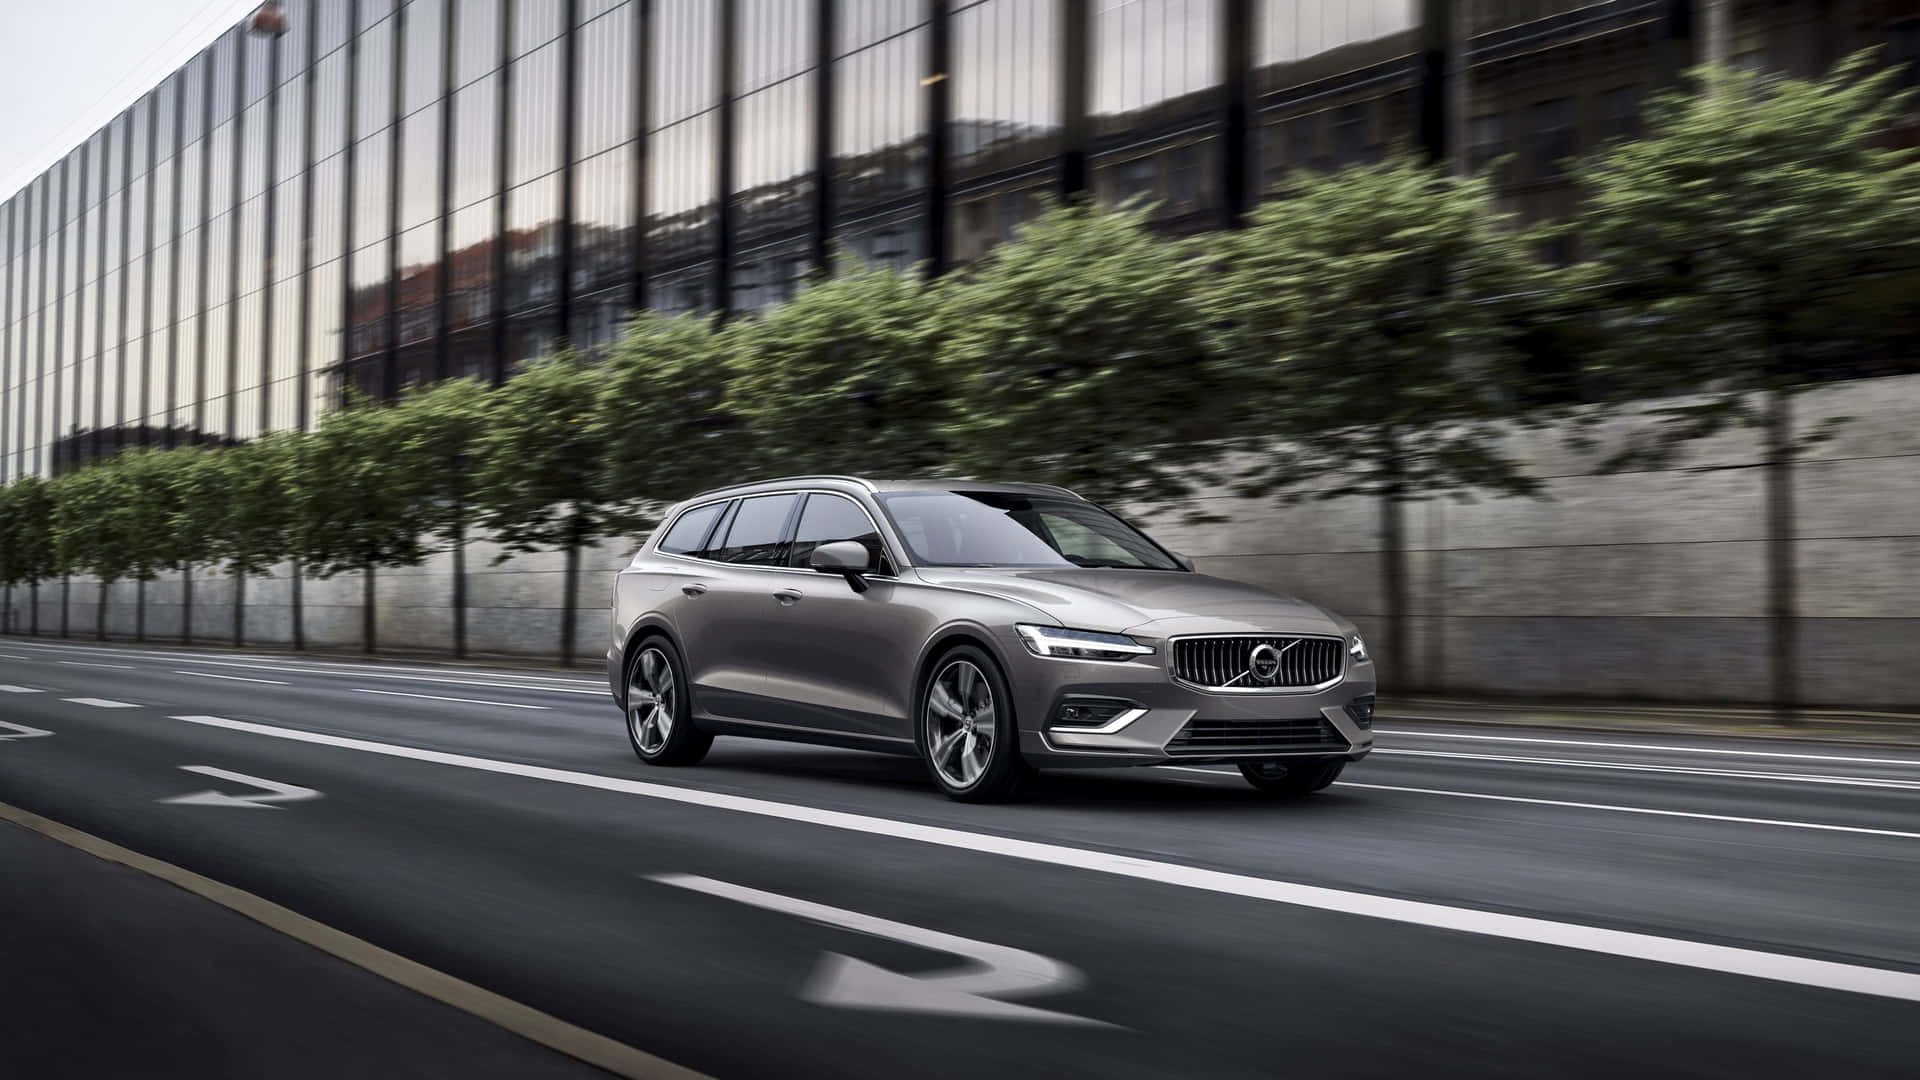 Caption: Stylish And Sophisticated - Volvo V60 On A Scenic Road Wallpaper